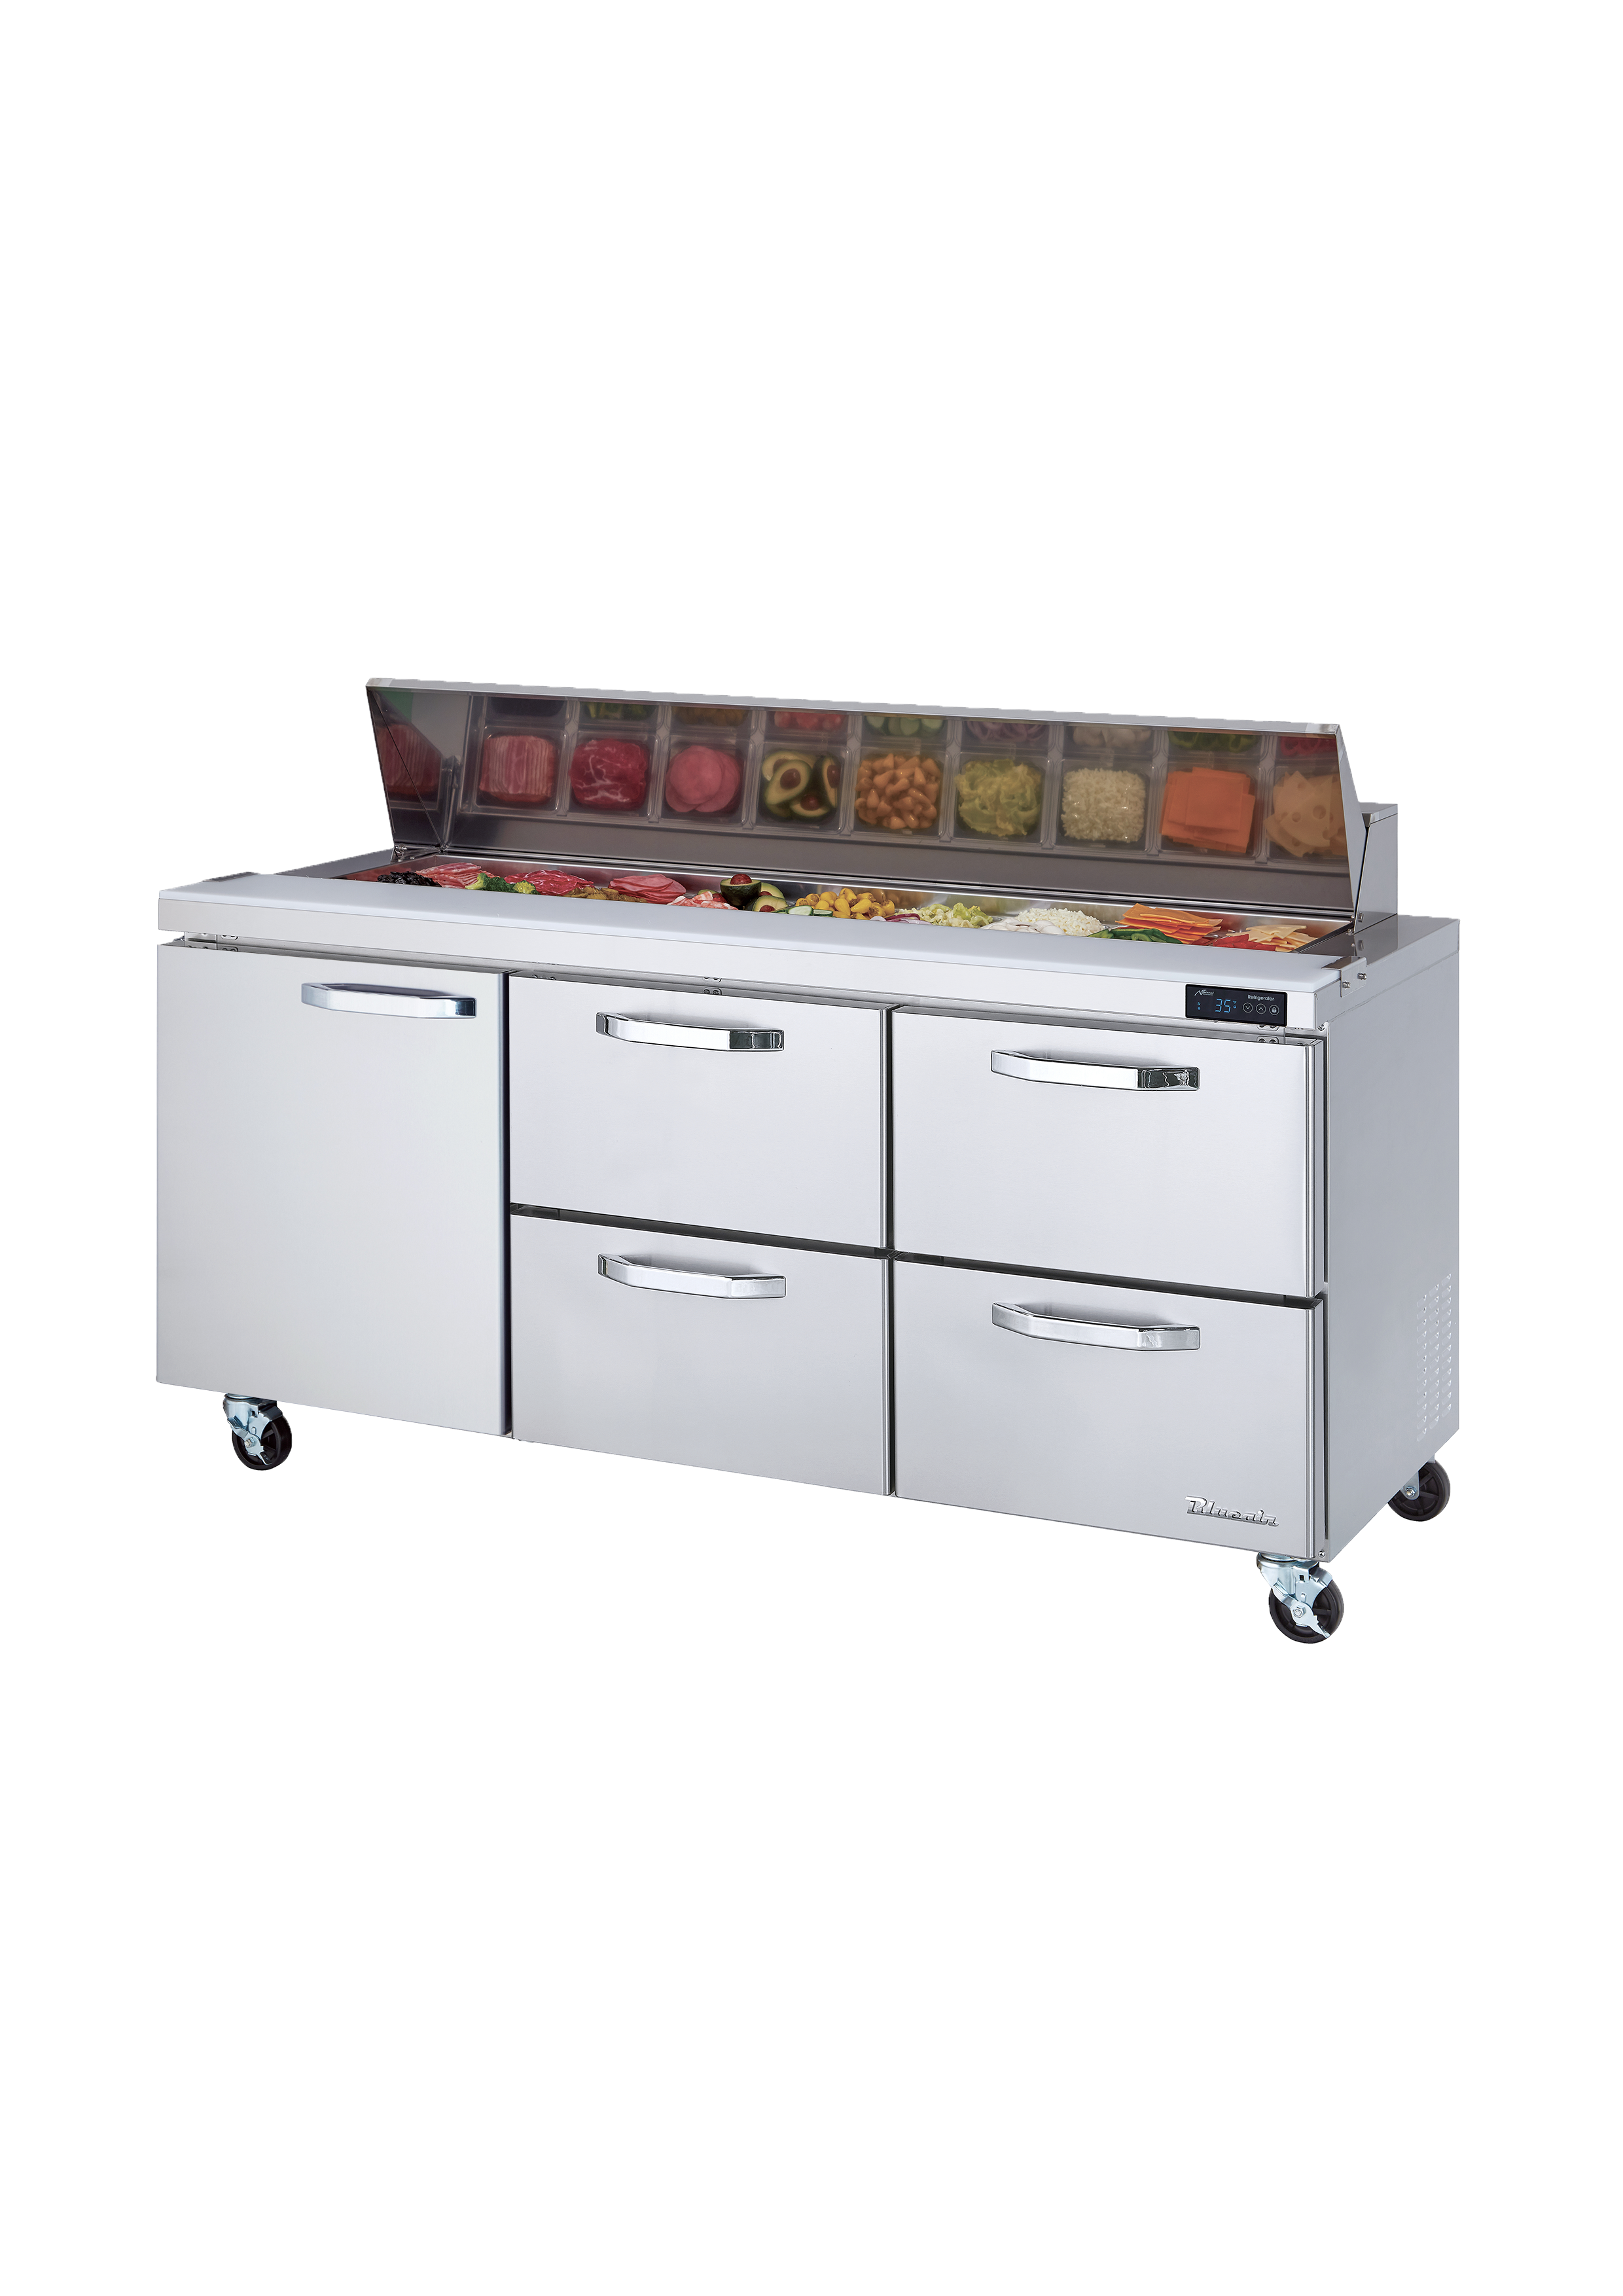 Blue Air - BLPT72-D4RM-HC, 4 Drawers 1 Door (L) All Stainless Prep. Table with (18) 1/6 Pans - 72" wide, 20 cu/ft., R-290 Refrigerant